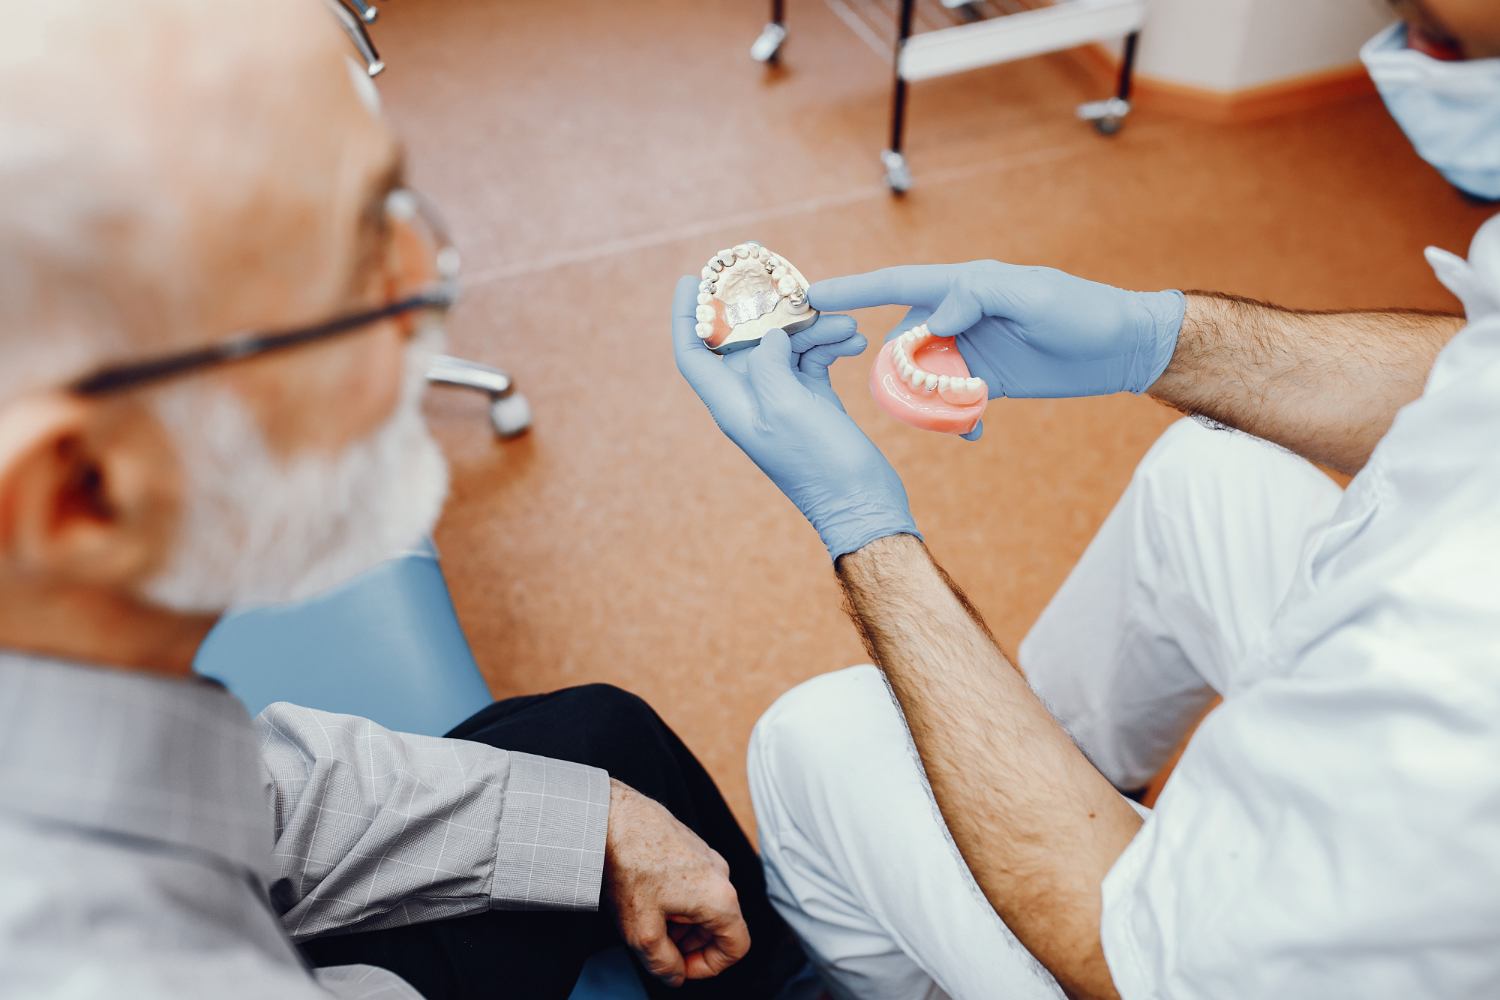 An older man sits with his dentist. The detist is holding a set of dentures and blue medical gloves, pointing at the detures and speaking to the older man.